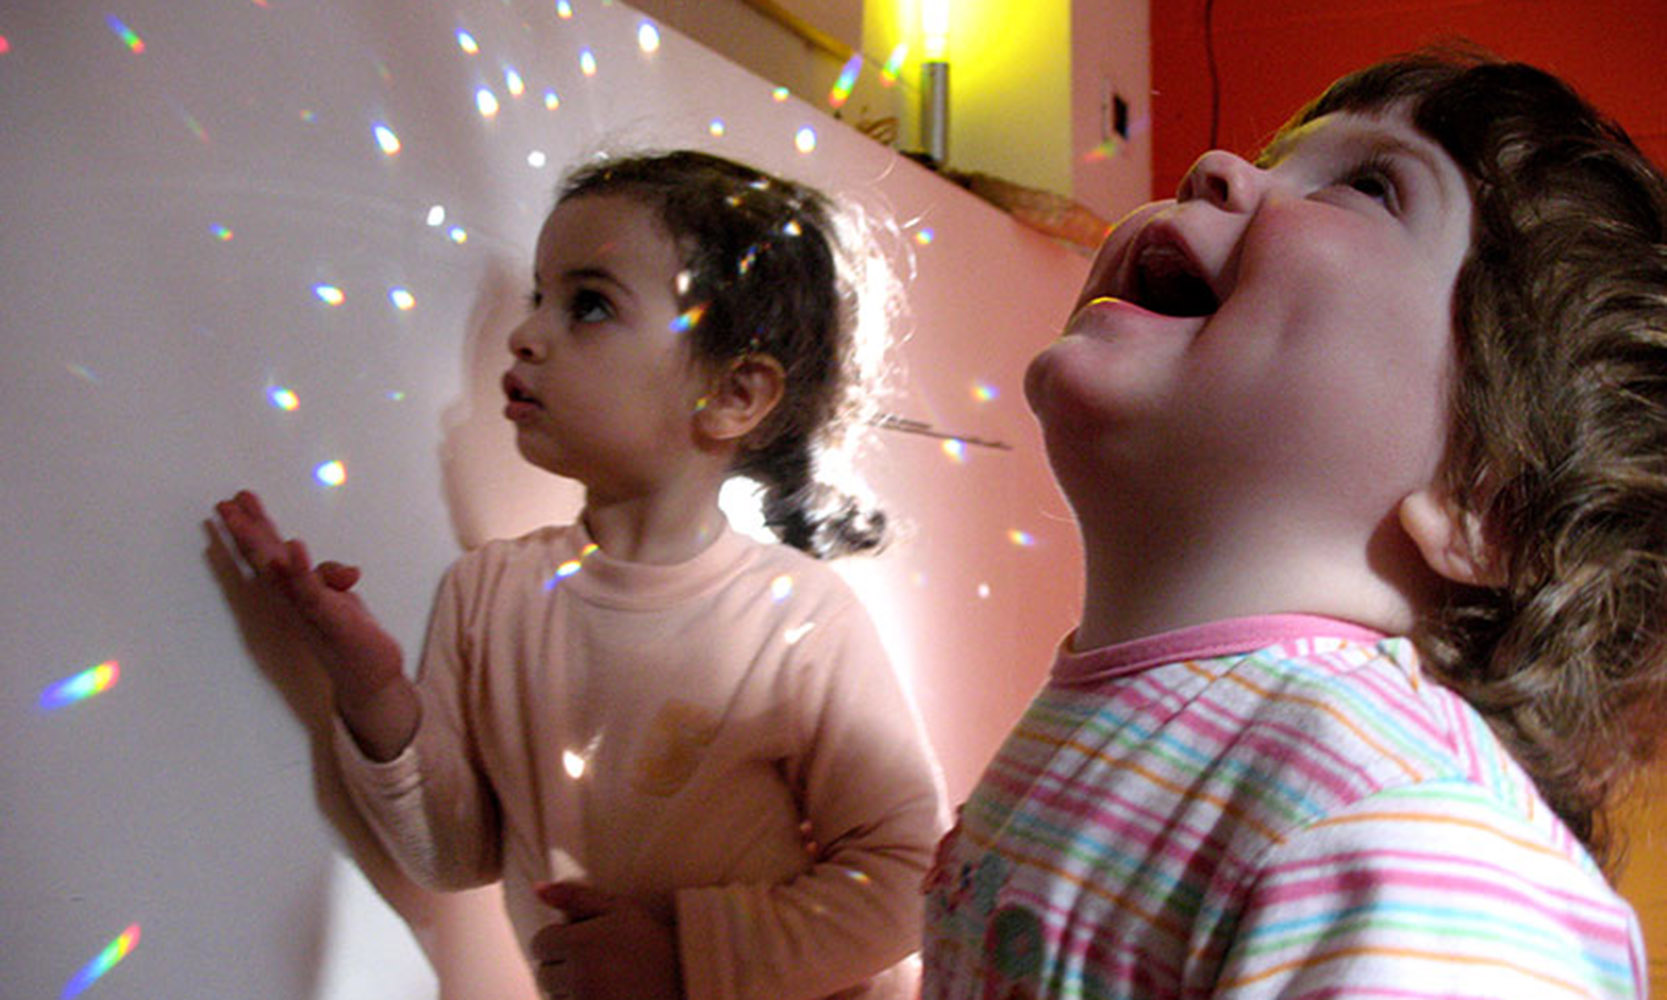 2 children looking at lights projected on the walls.